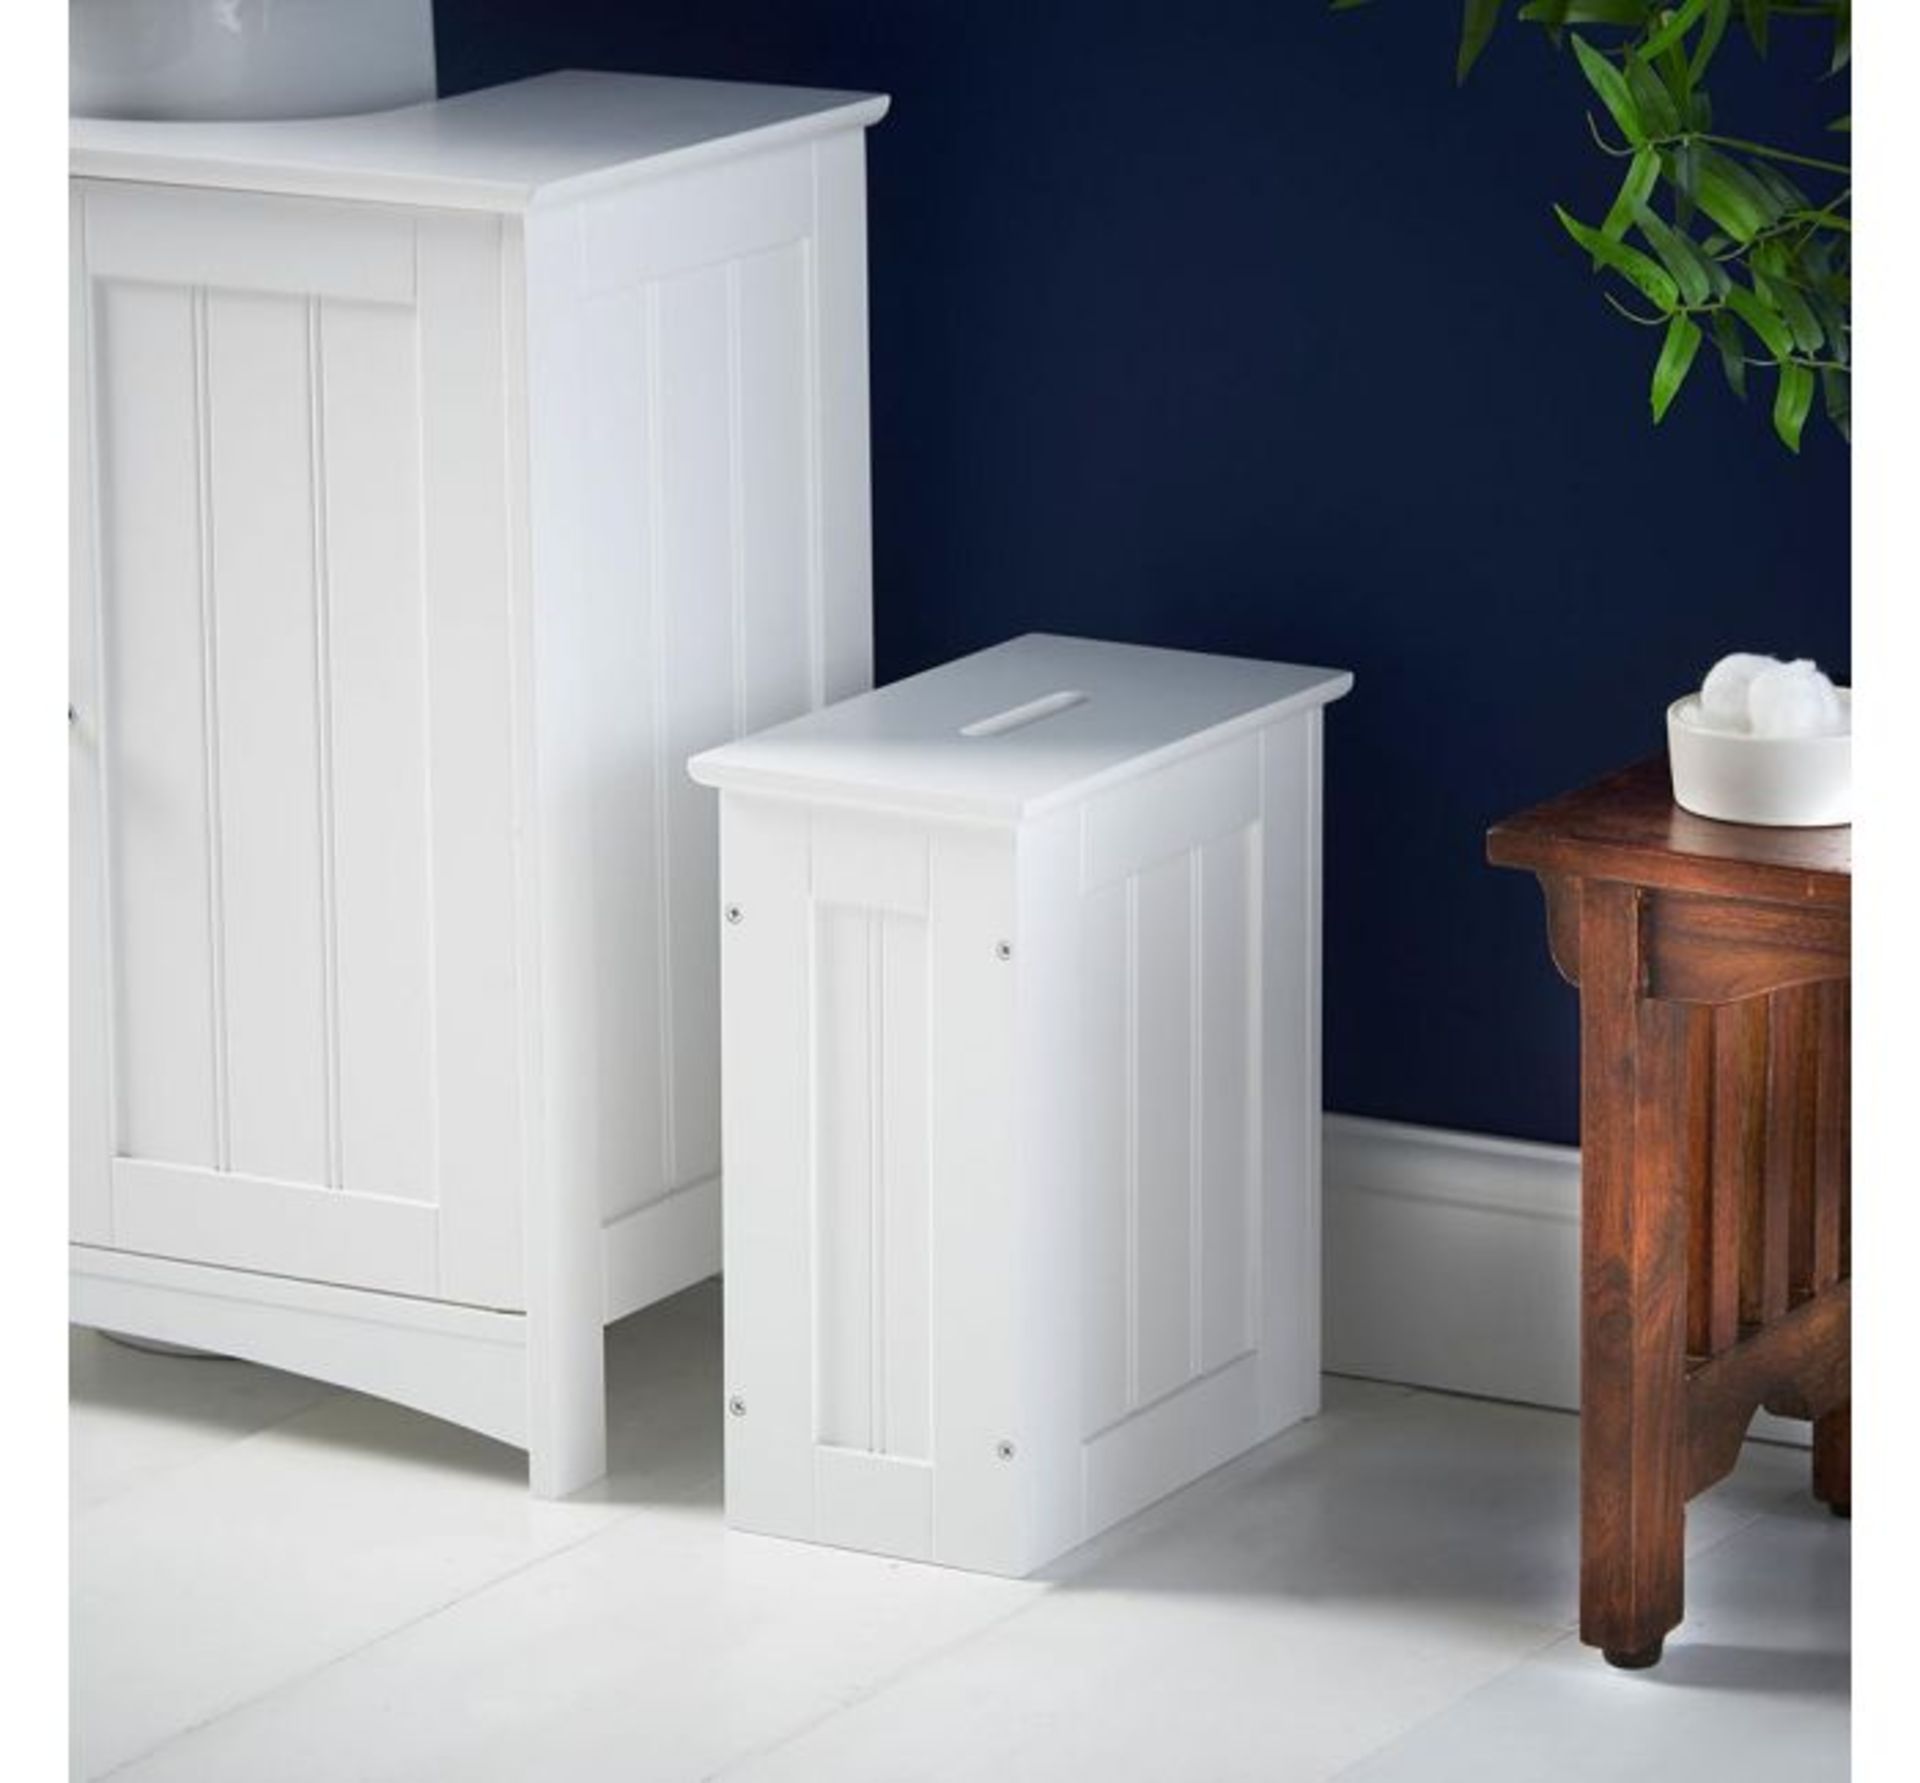 (X30) 1x Colonial Storage Hamper. MDF with painted finish Water-resistant & easy to clean Arrive...